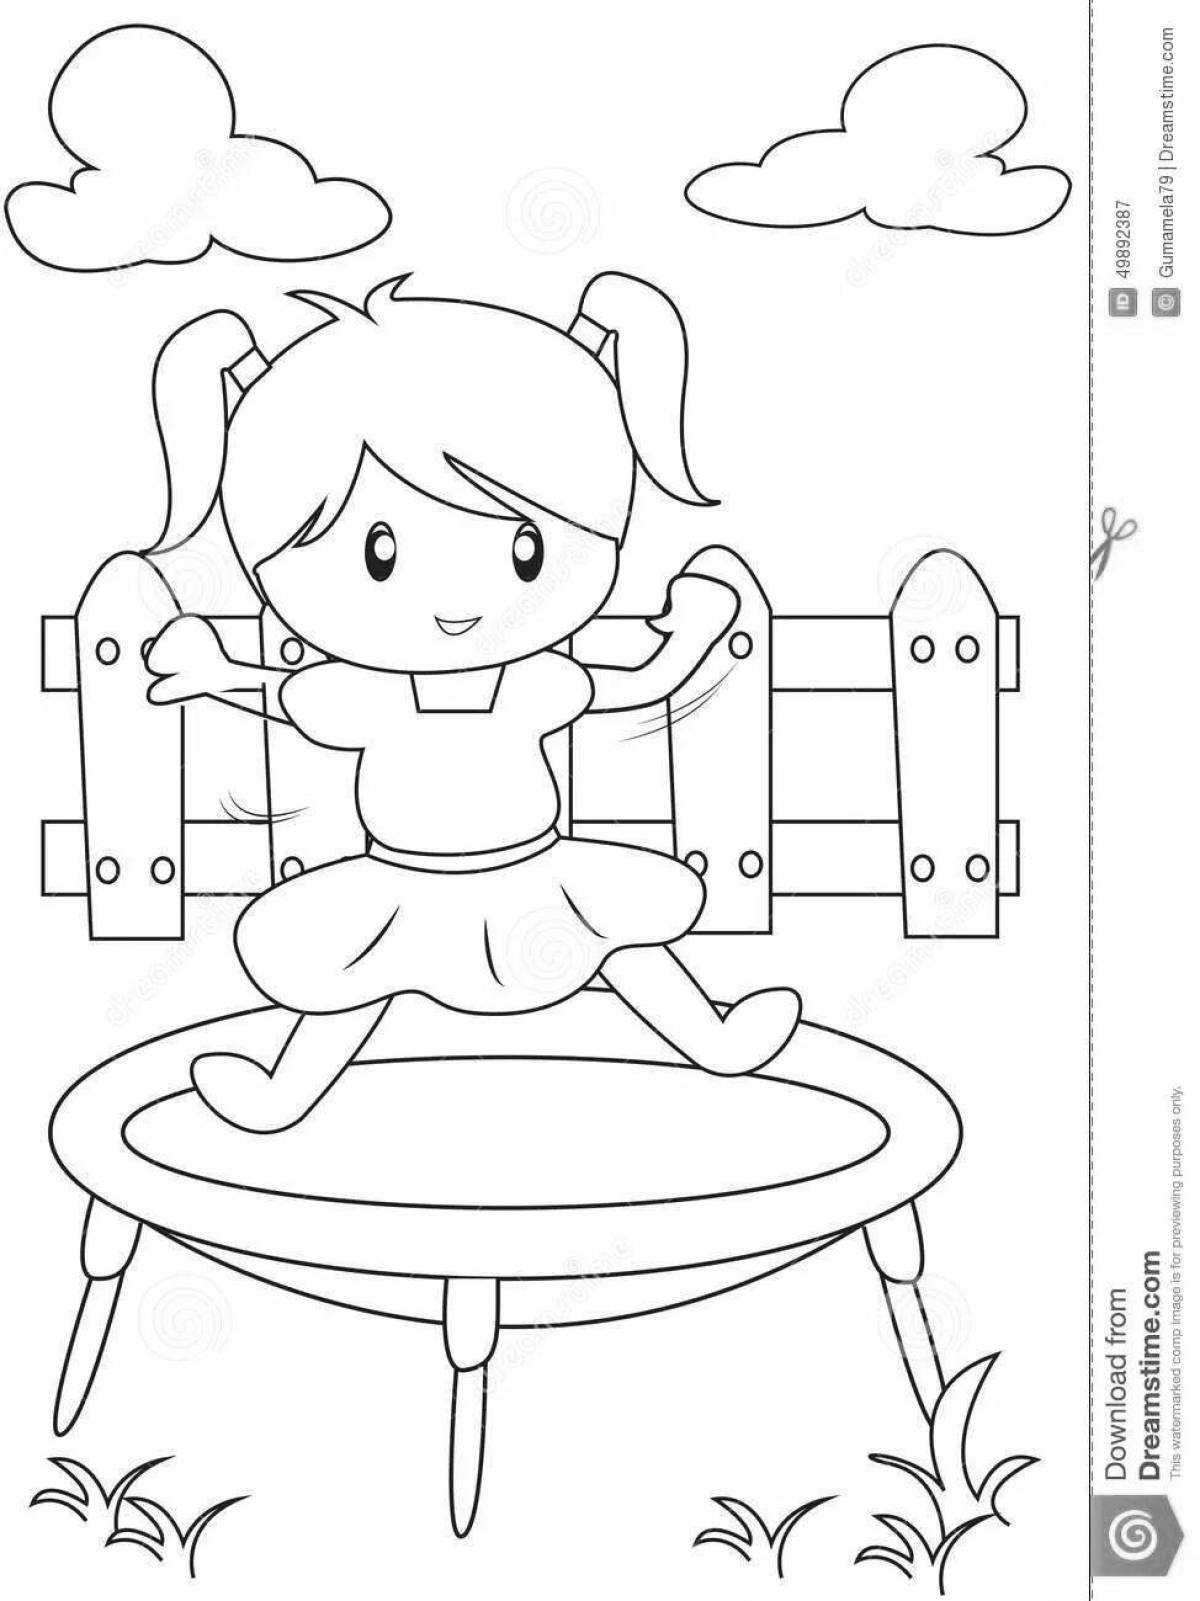 Animated jumping coloring page